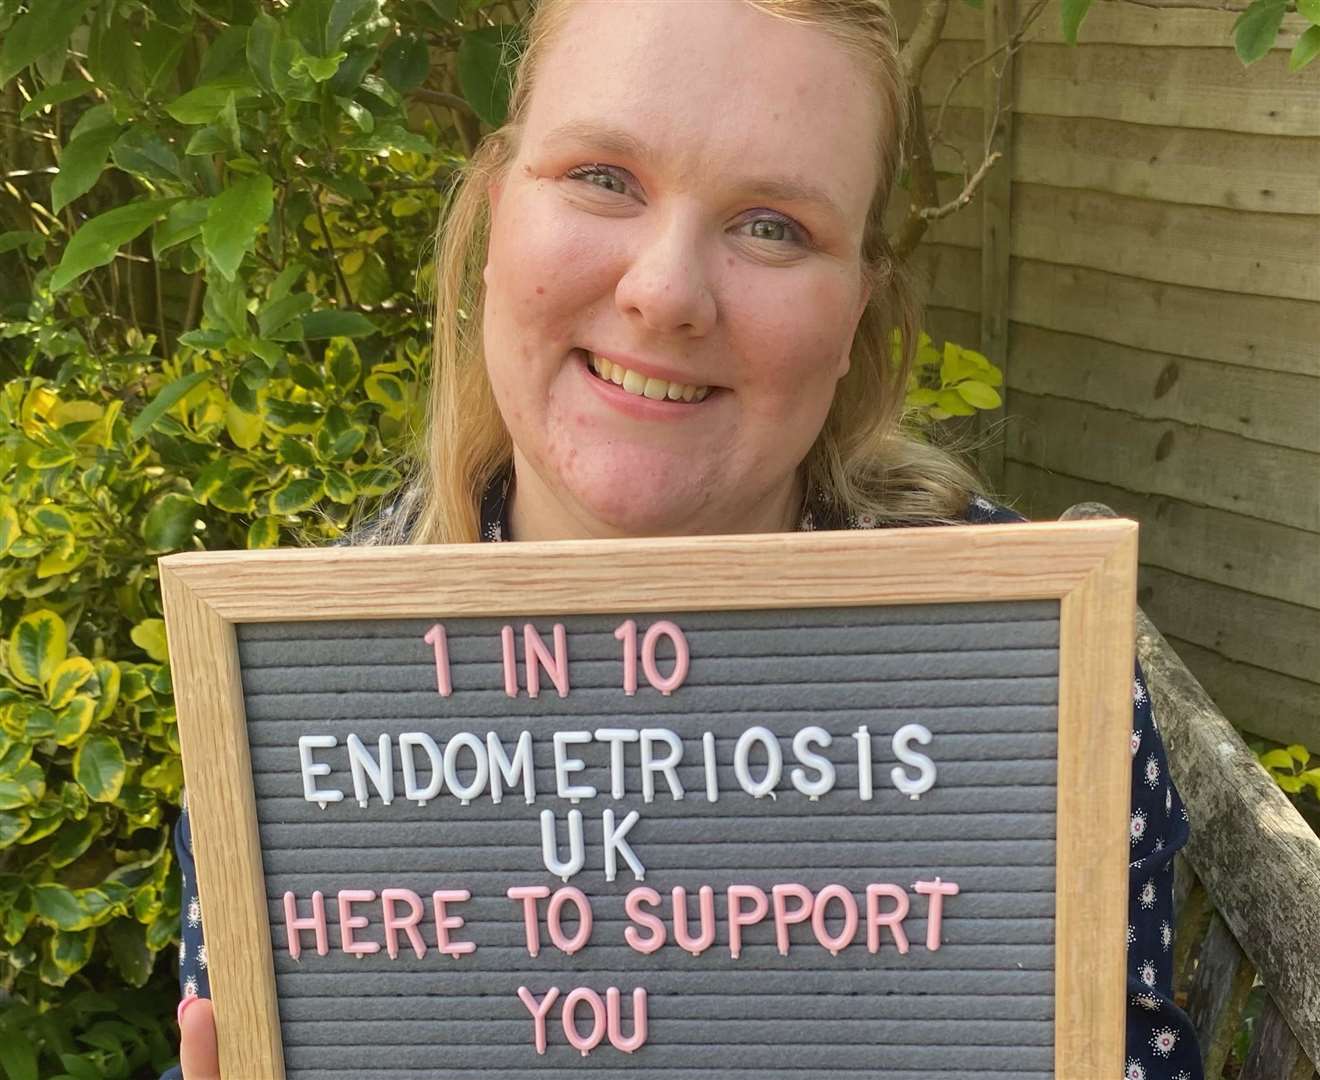 Nickie Broadbent has been suffering from endometriosis since she was 15